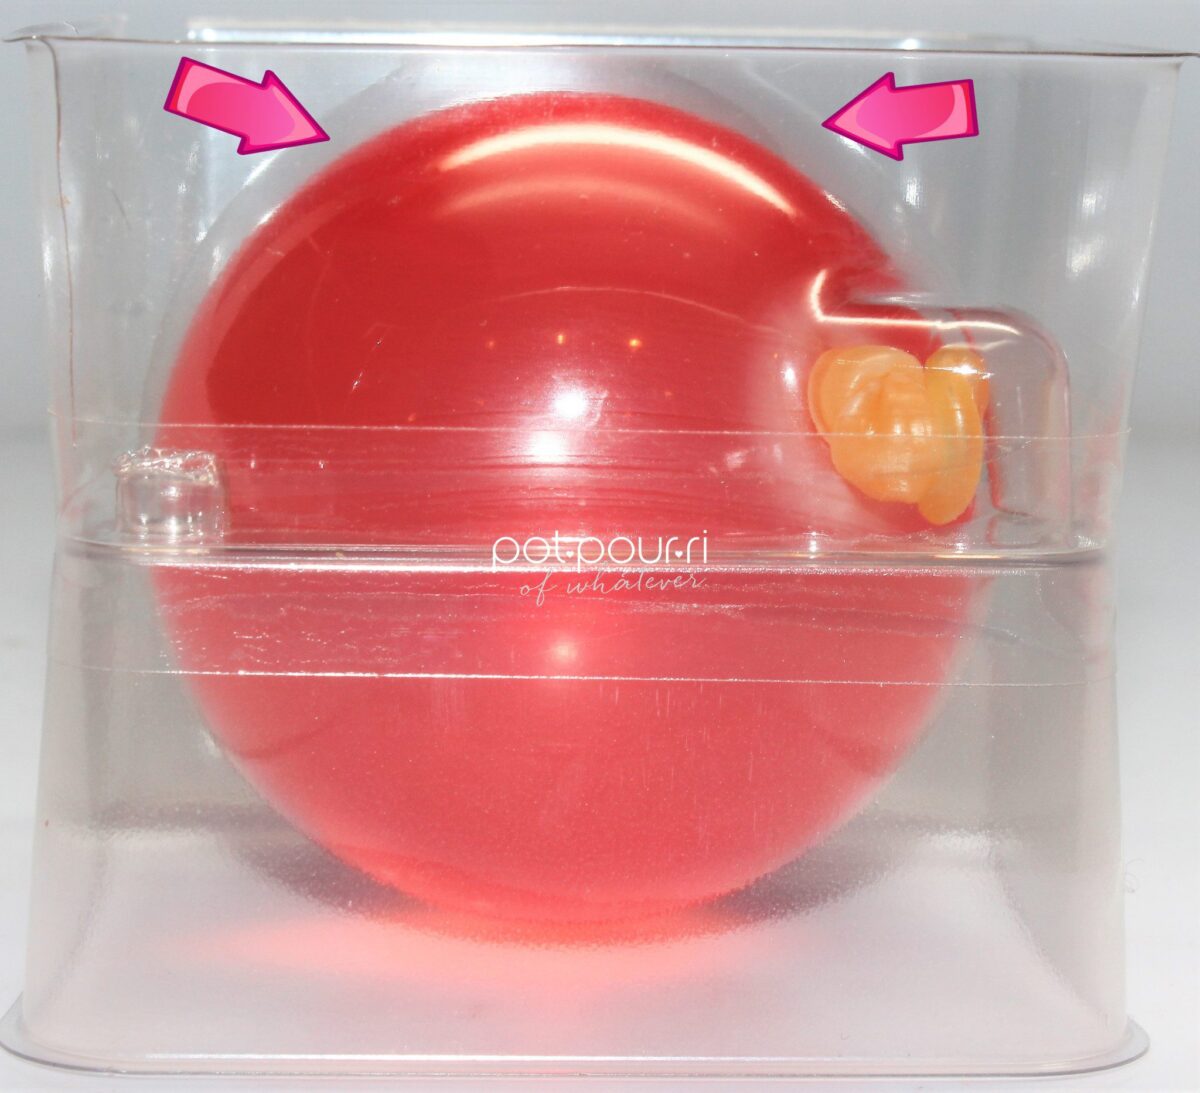 Jelly Ball is encased in a latex balloon seal